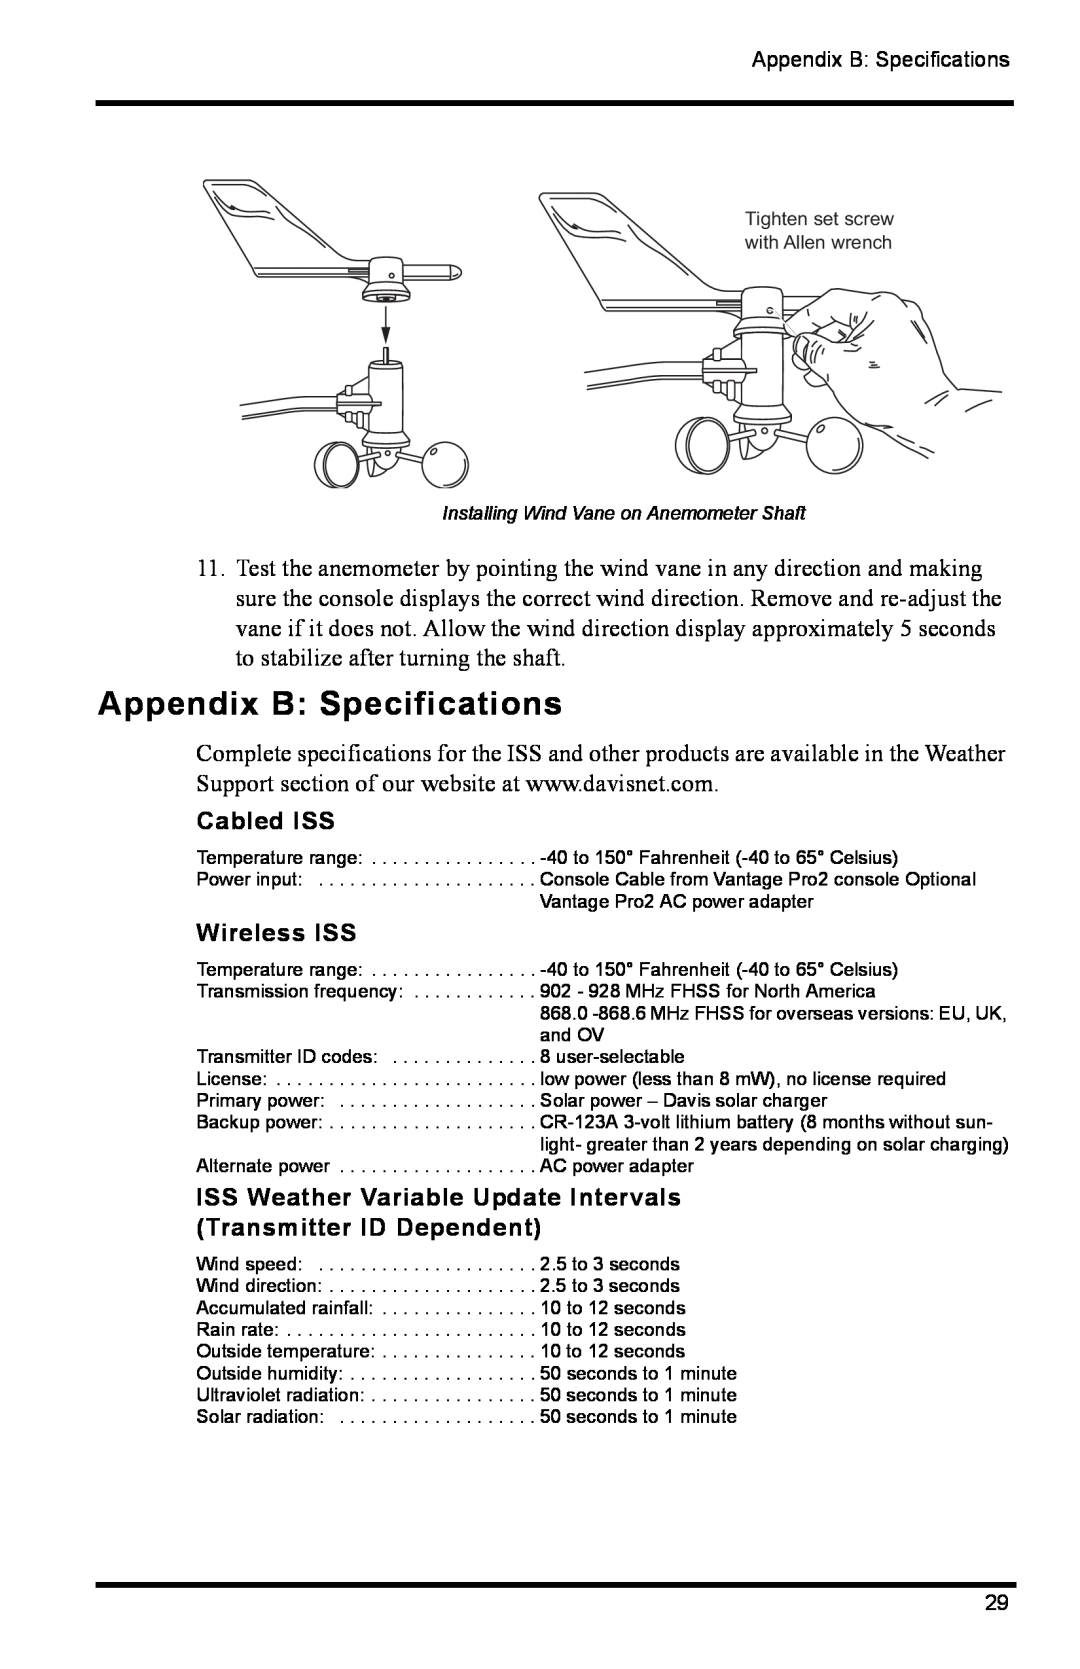 DAVIS 6322C Appendix B Specifications, Cabled ISS, Wireless ISS, ISS Weather Variable Update Intervals 